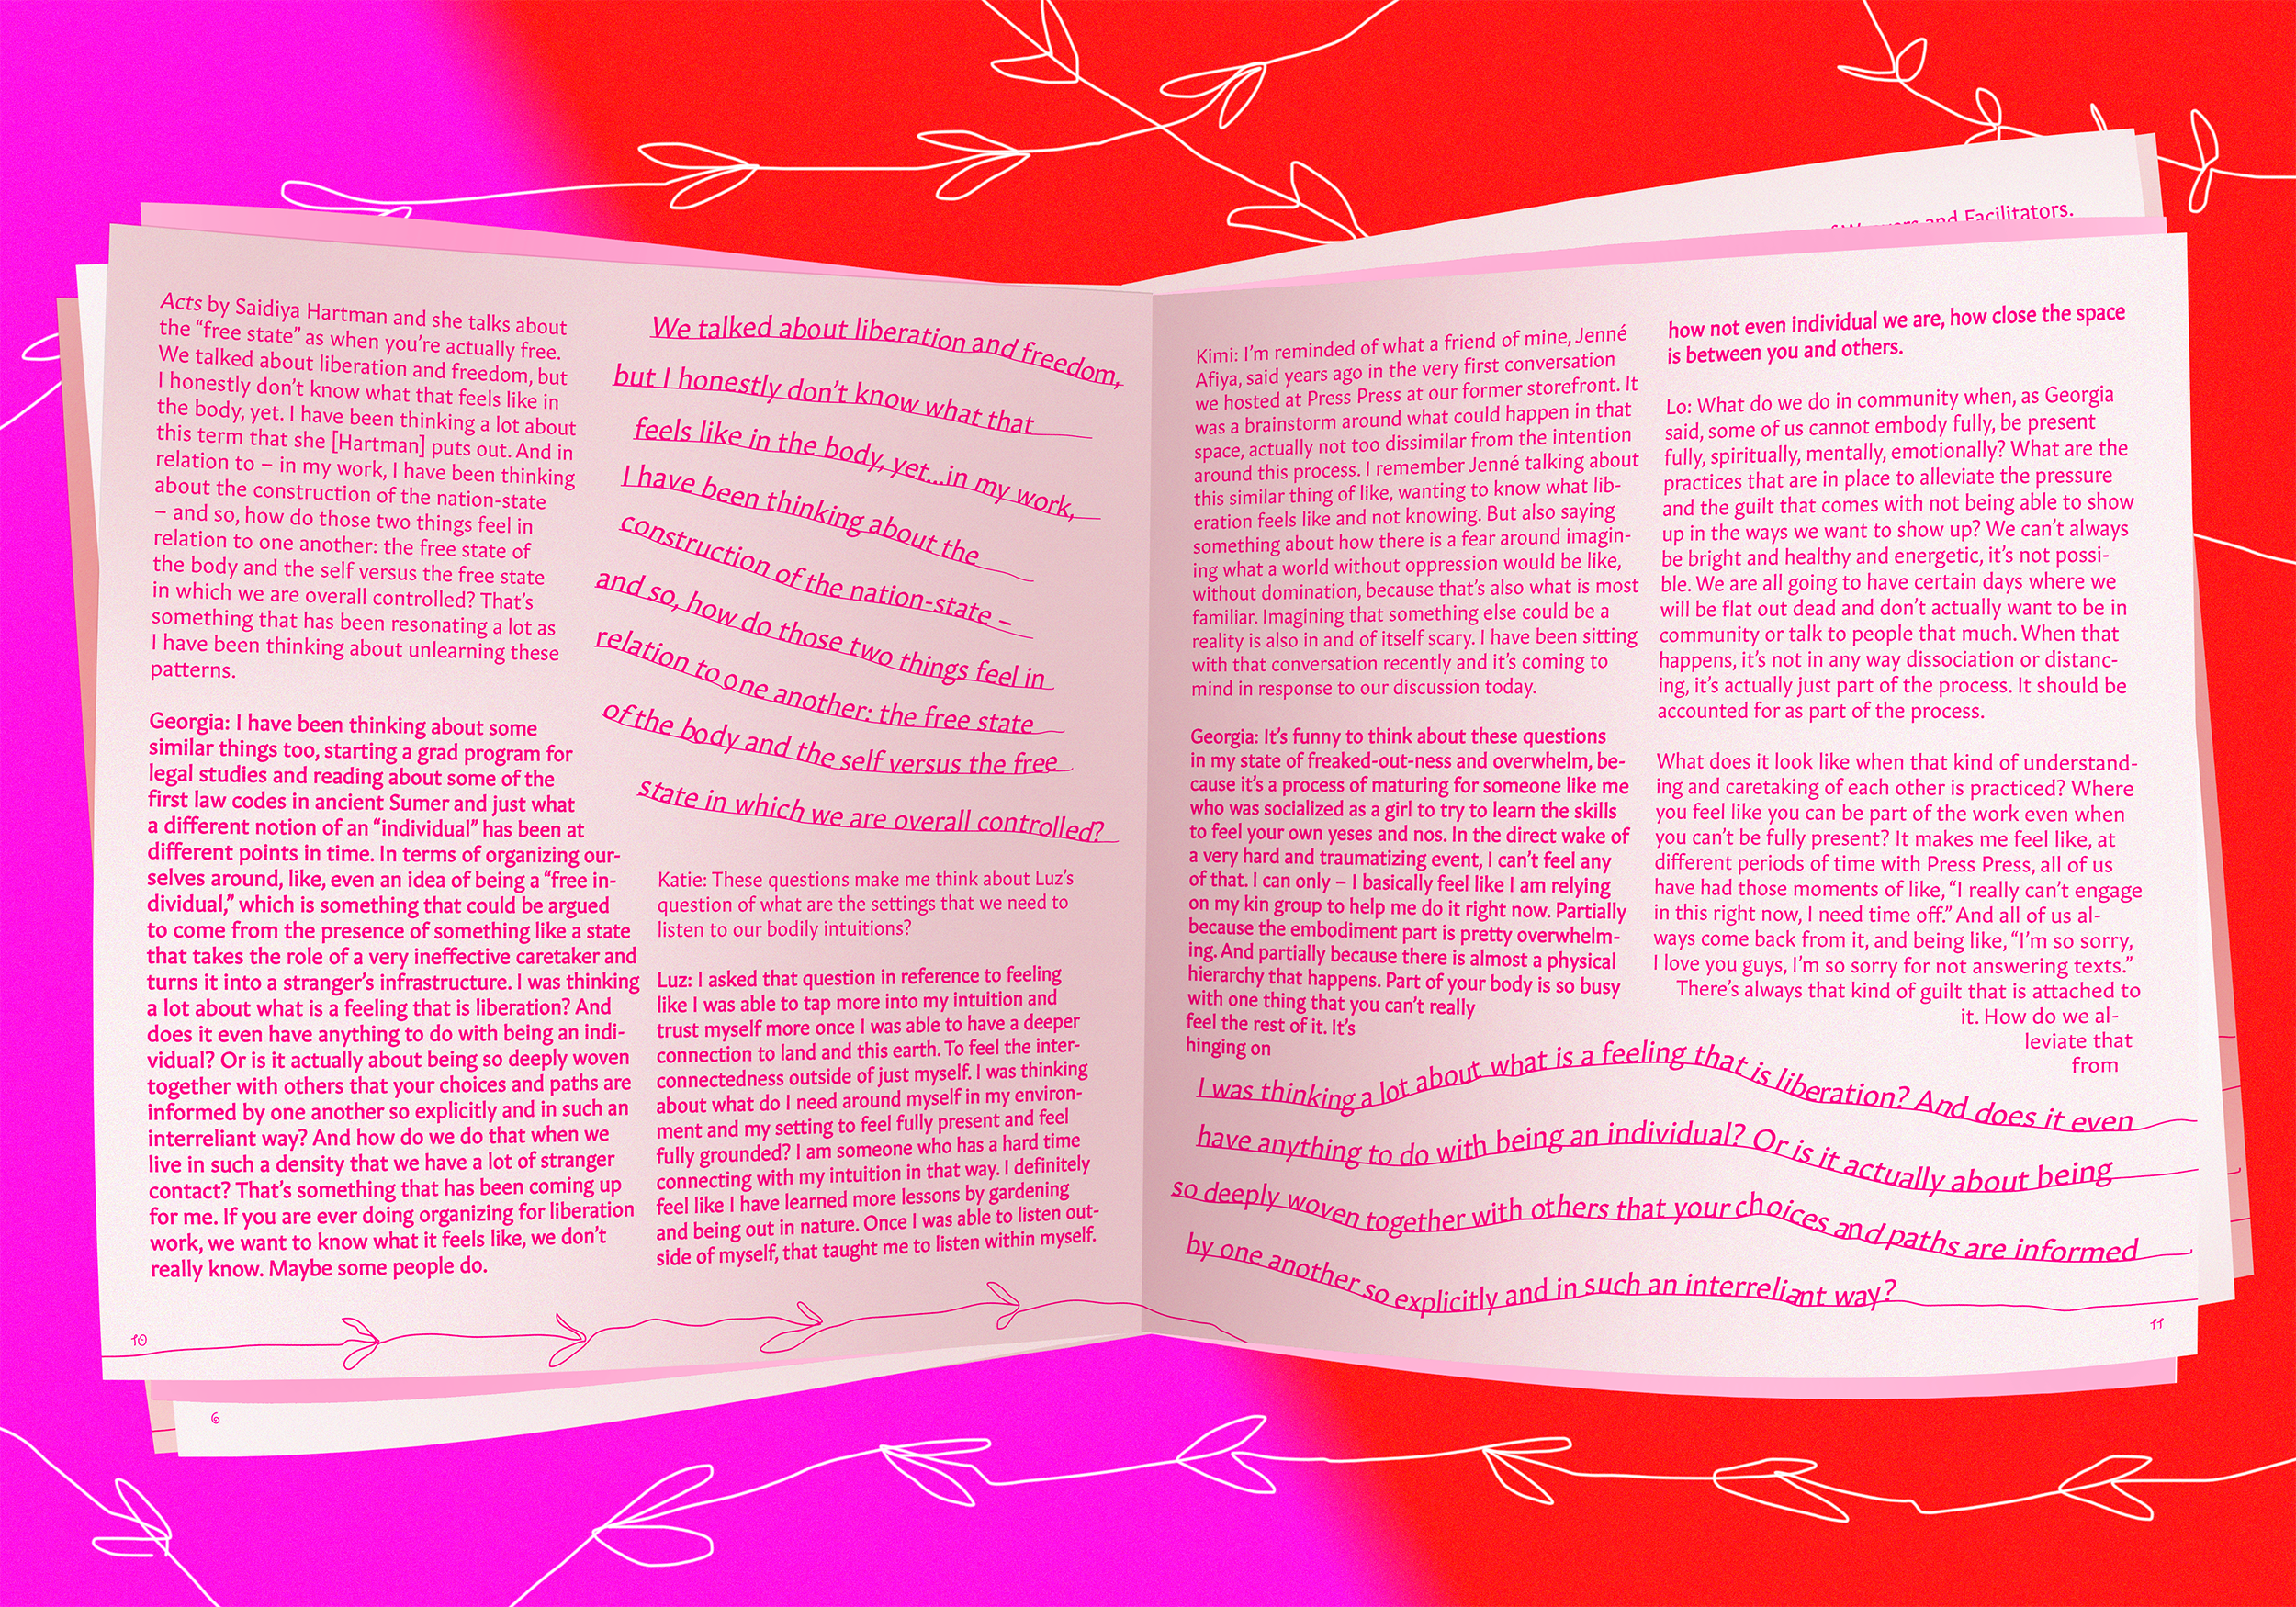 A rendering of a newsprint publication lays on top of a gradient bright purple to red background. In the background, white line drawings of vines appear. The open newsprint has bright magenta printed letters in two columns on each page. The columns are interrupted by larger quotes. The quoted letters are placed on hand drawn lines that curve across segments of the page. 